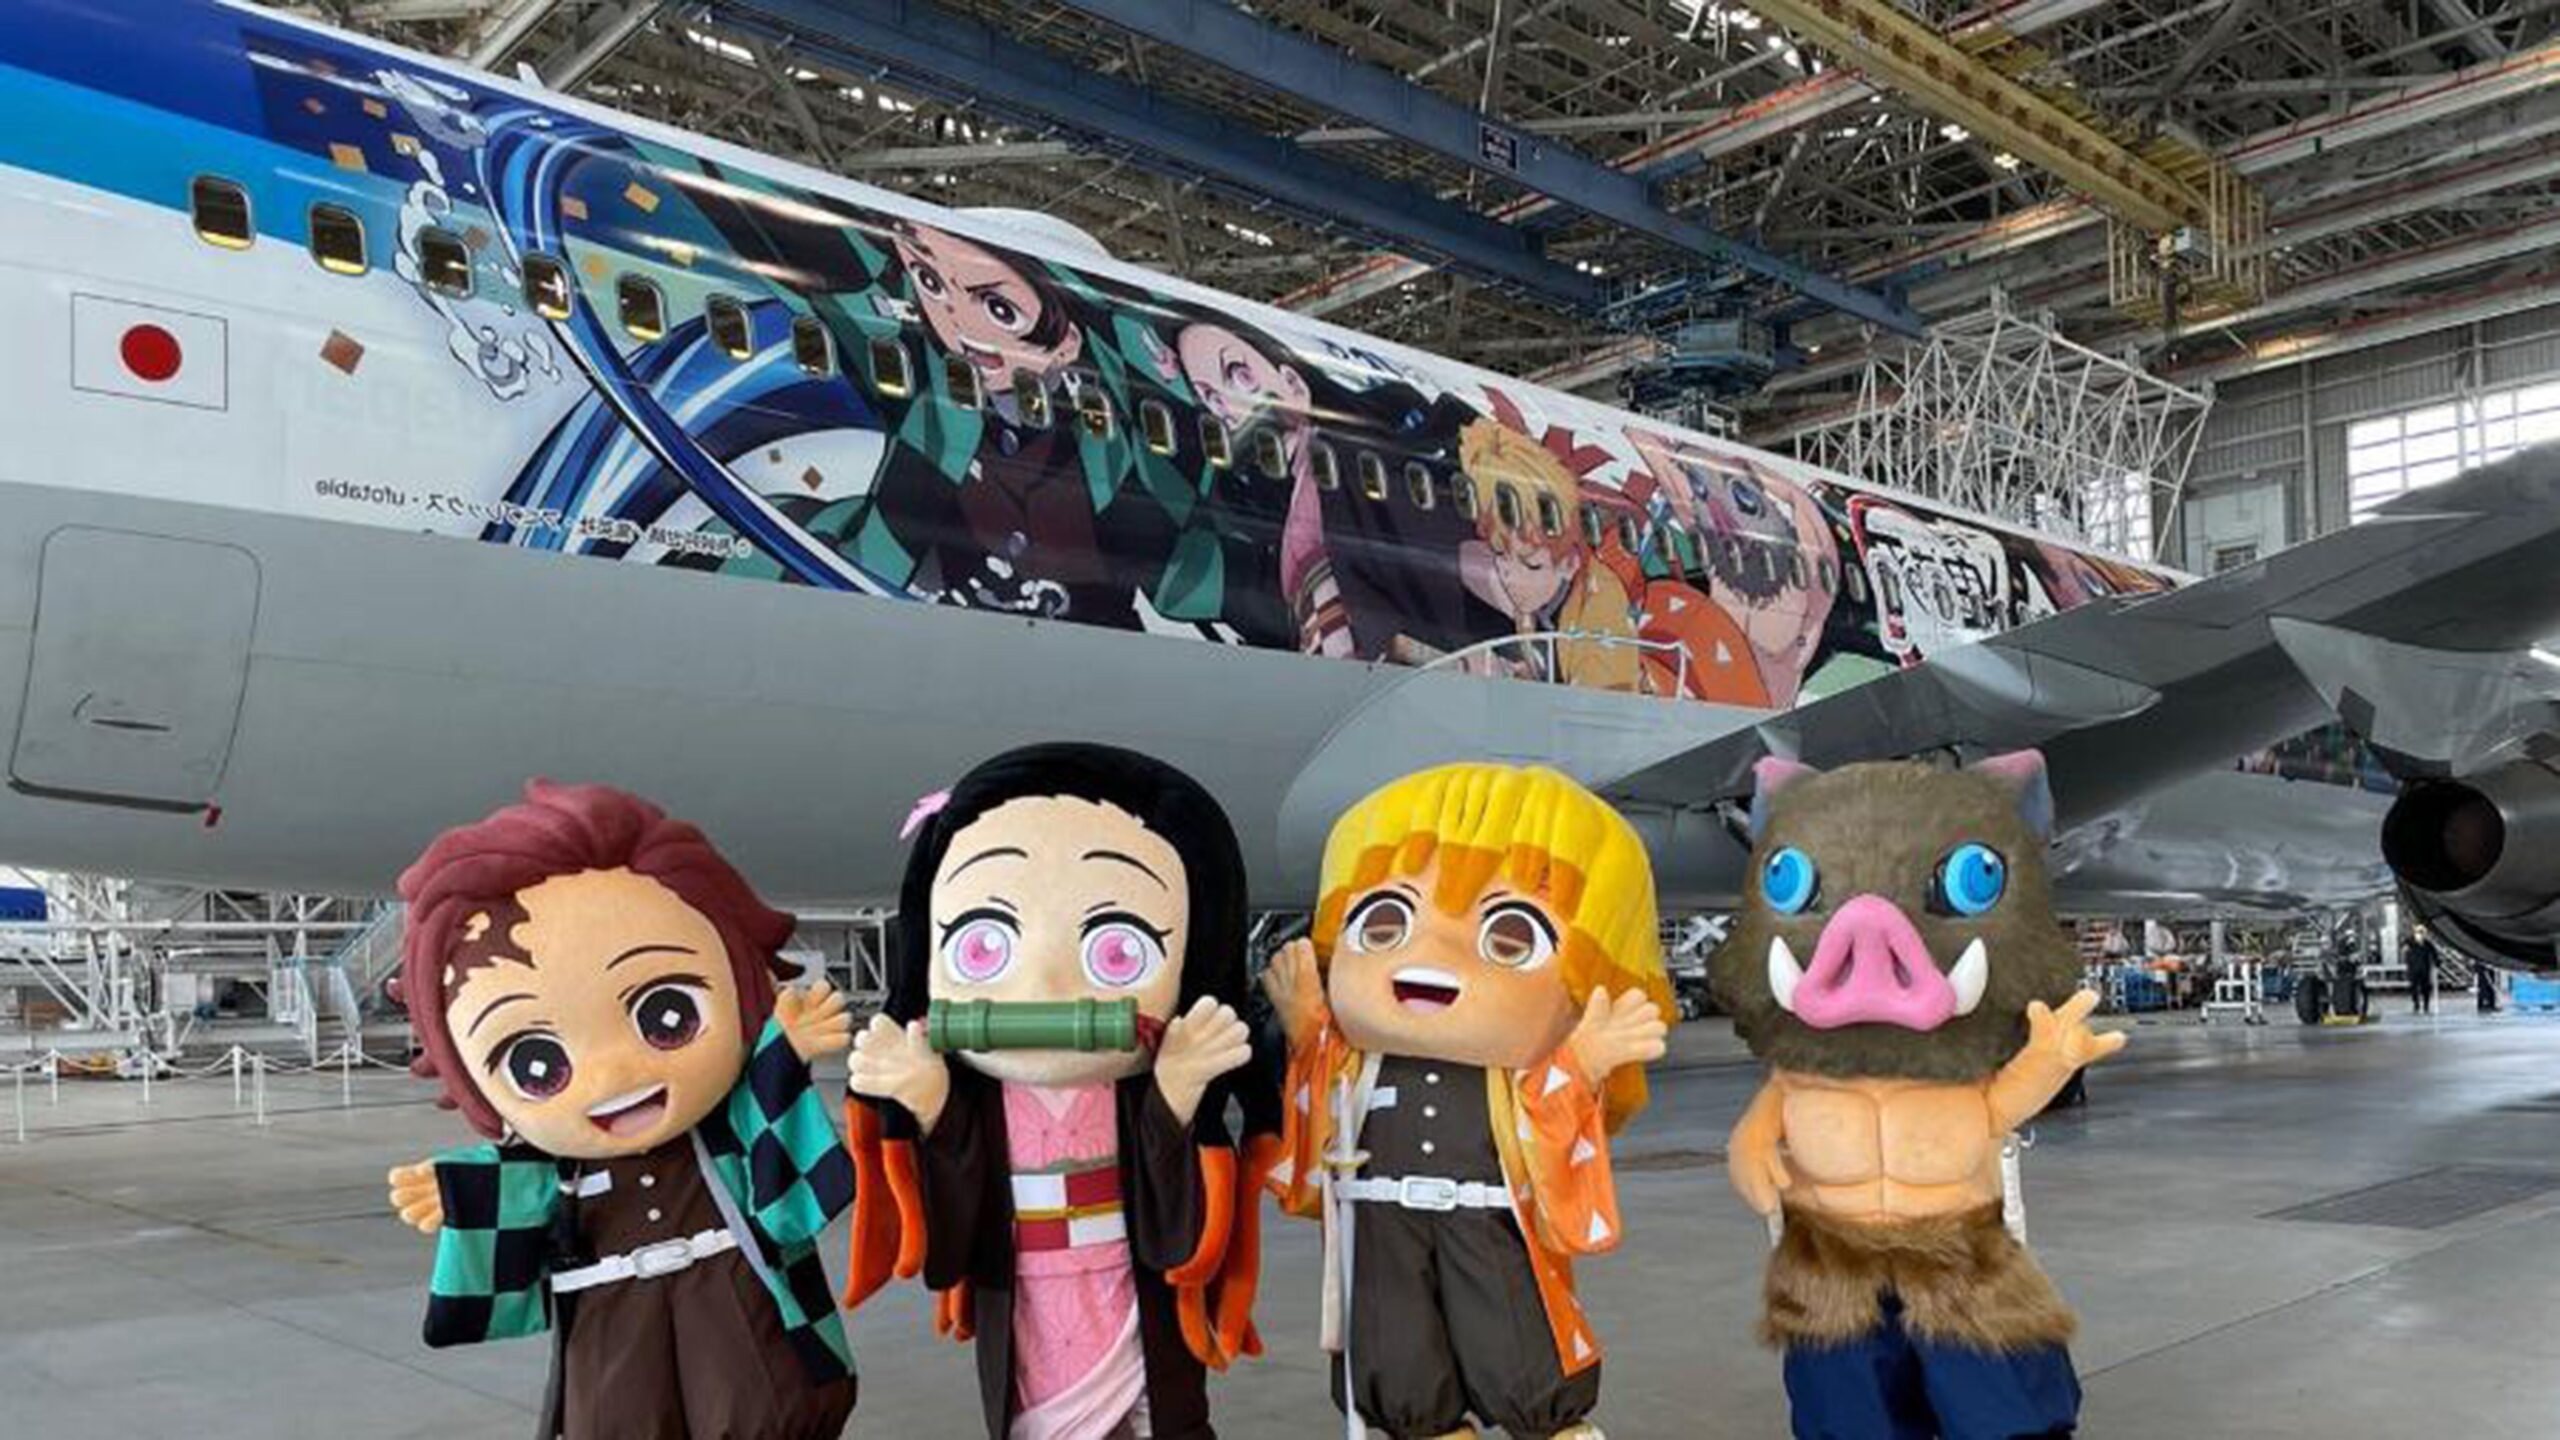 Demon Slayer-Themed Planes Wow Fans In Japan